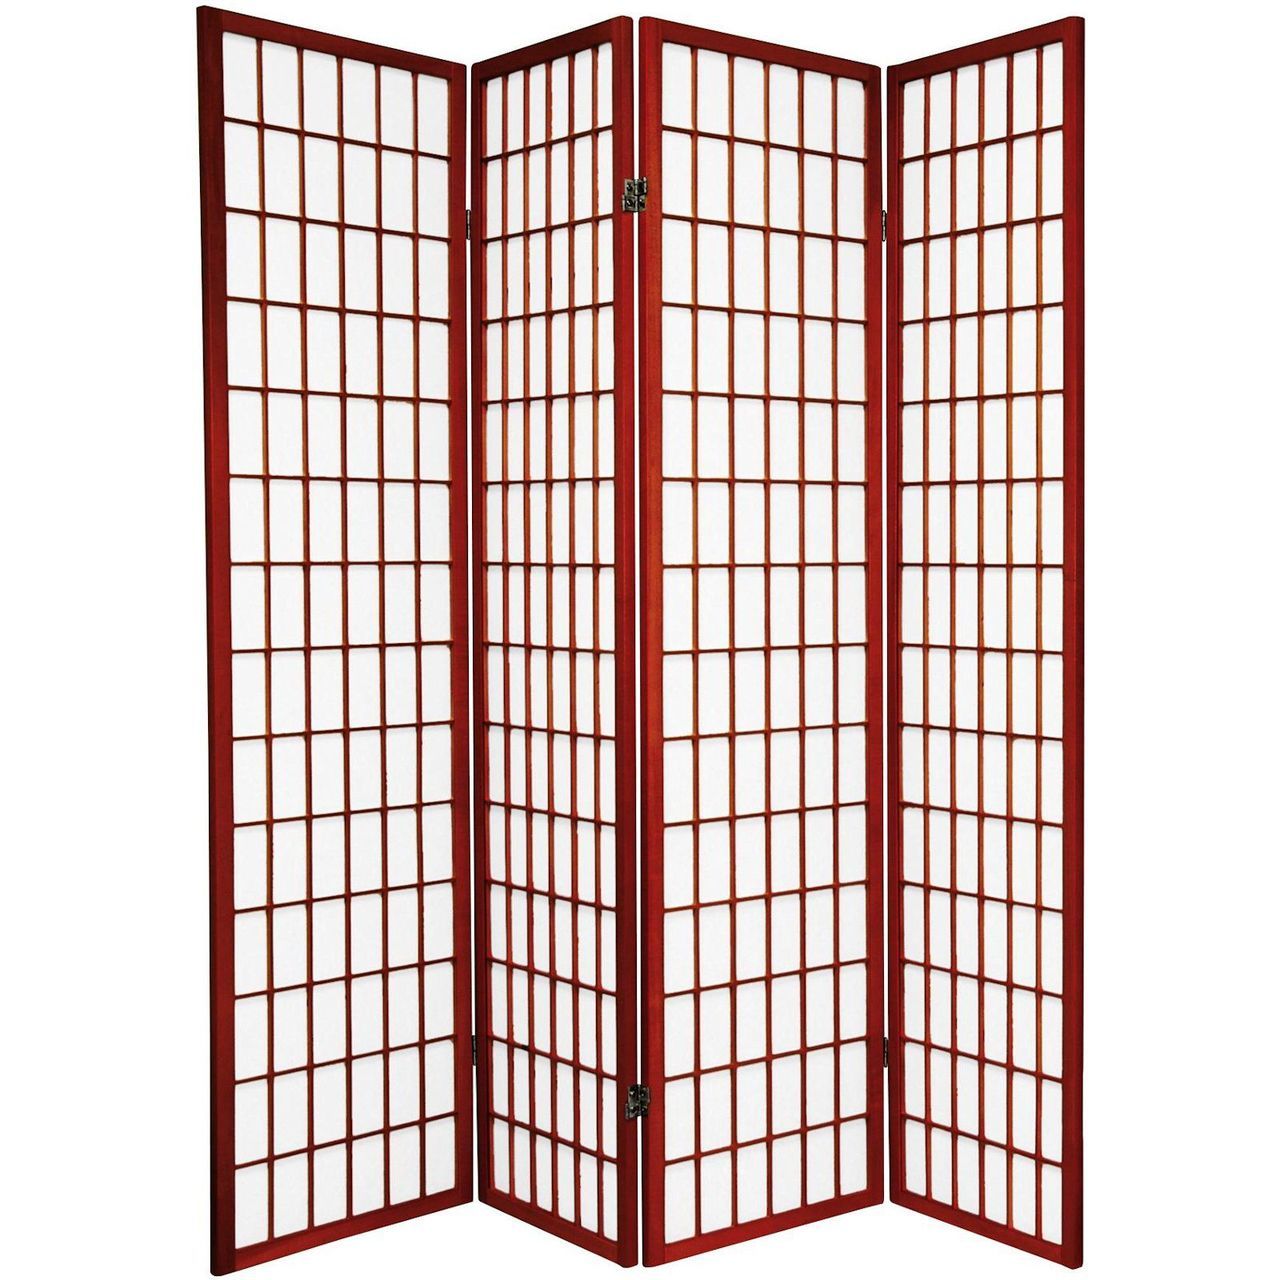 Legacy Decor Japanese Oriental 4 Panel Room Divider, 71" Tall, Cherry - image 1 of 2